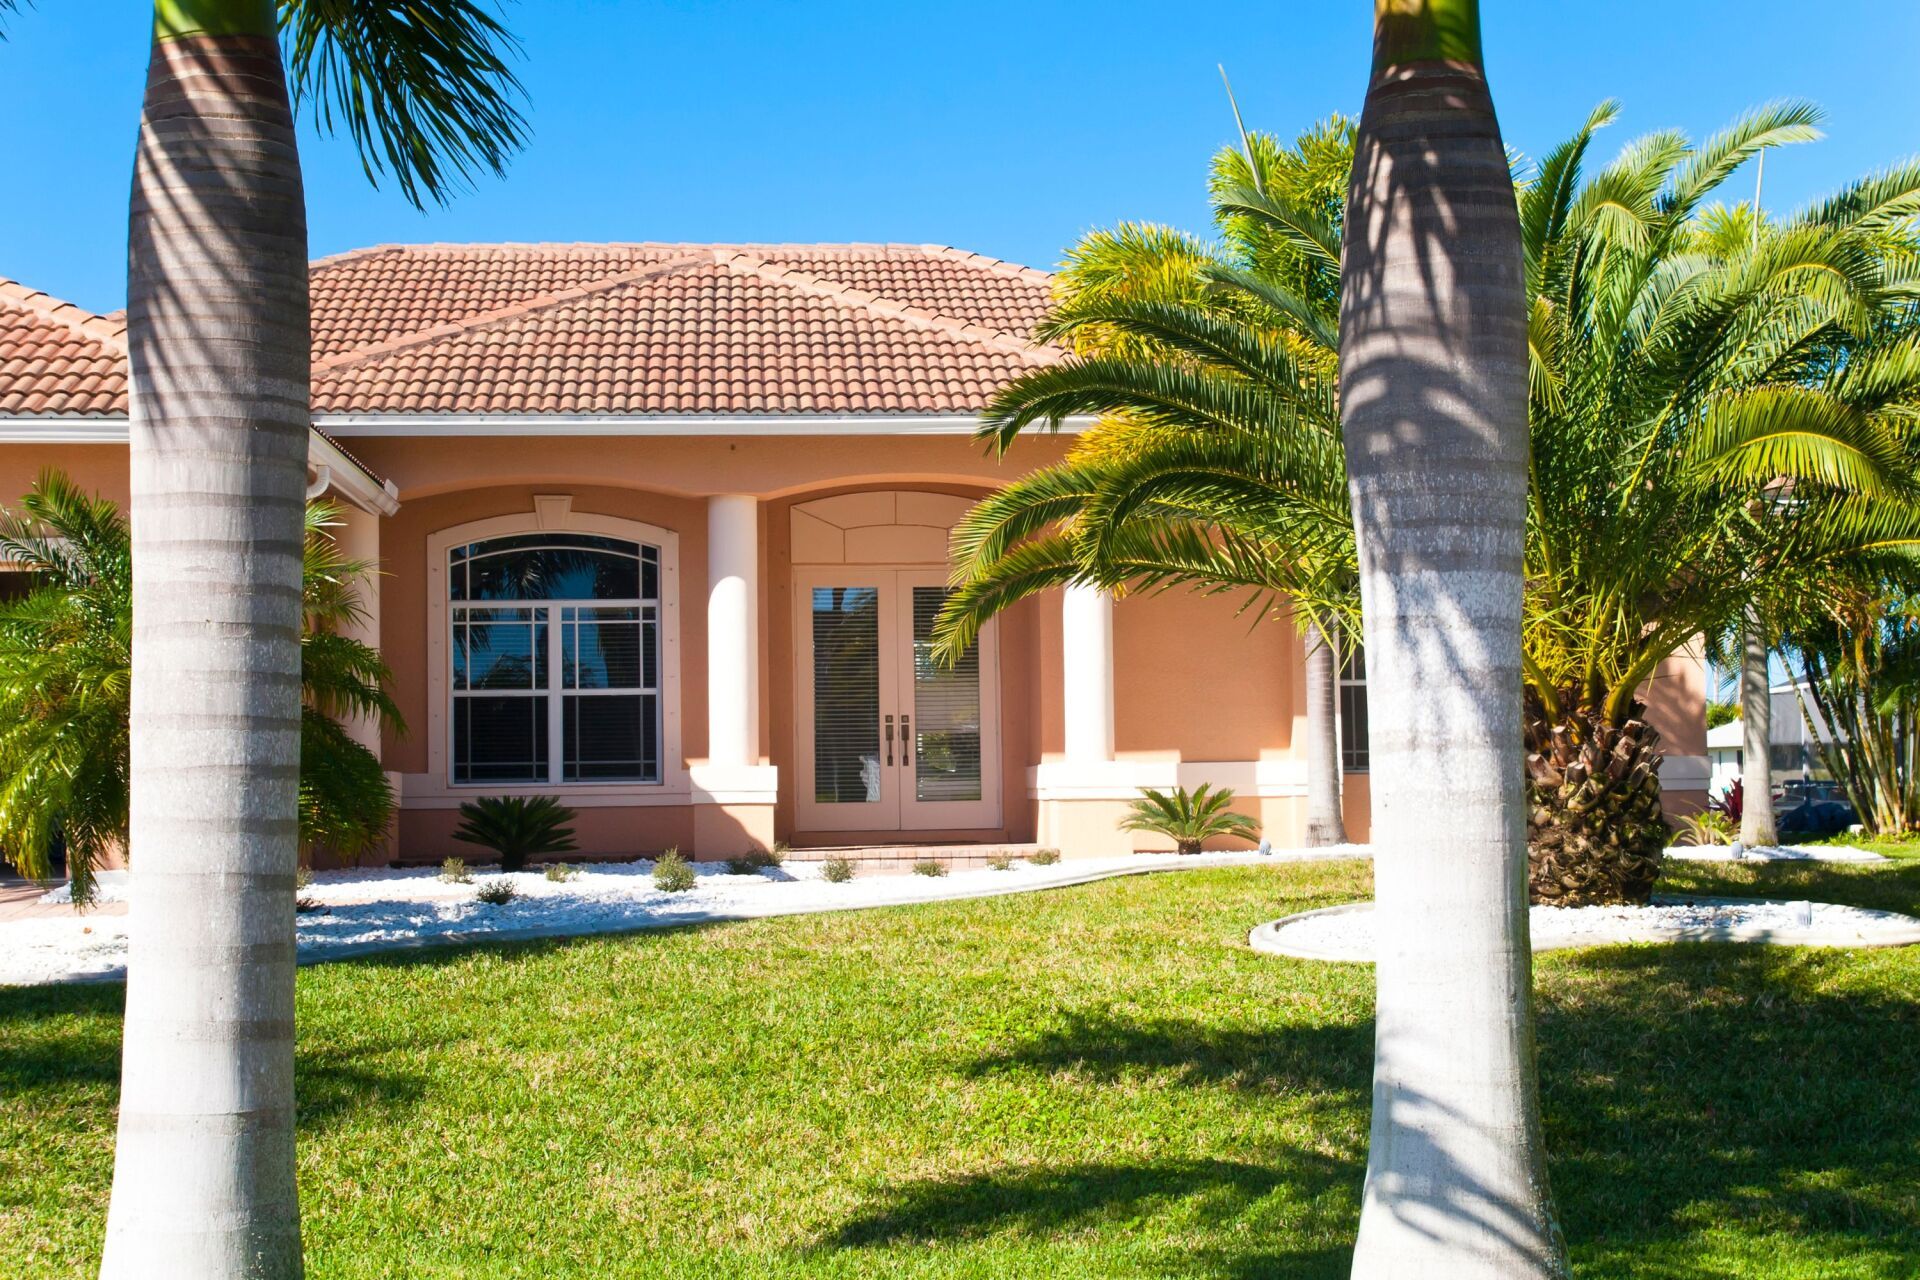 Tampa Bay Home With Palm Trees and Green Grass